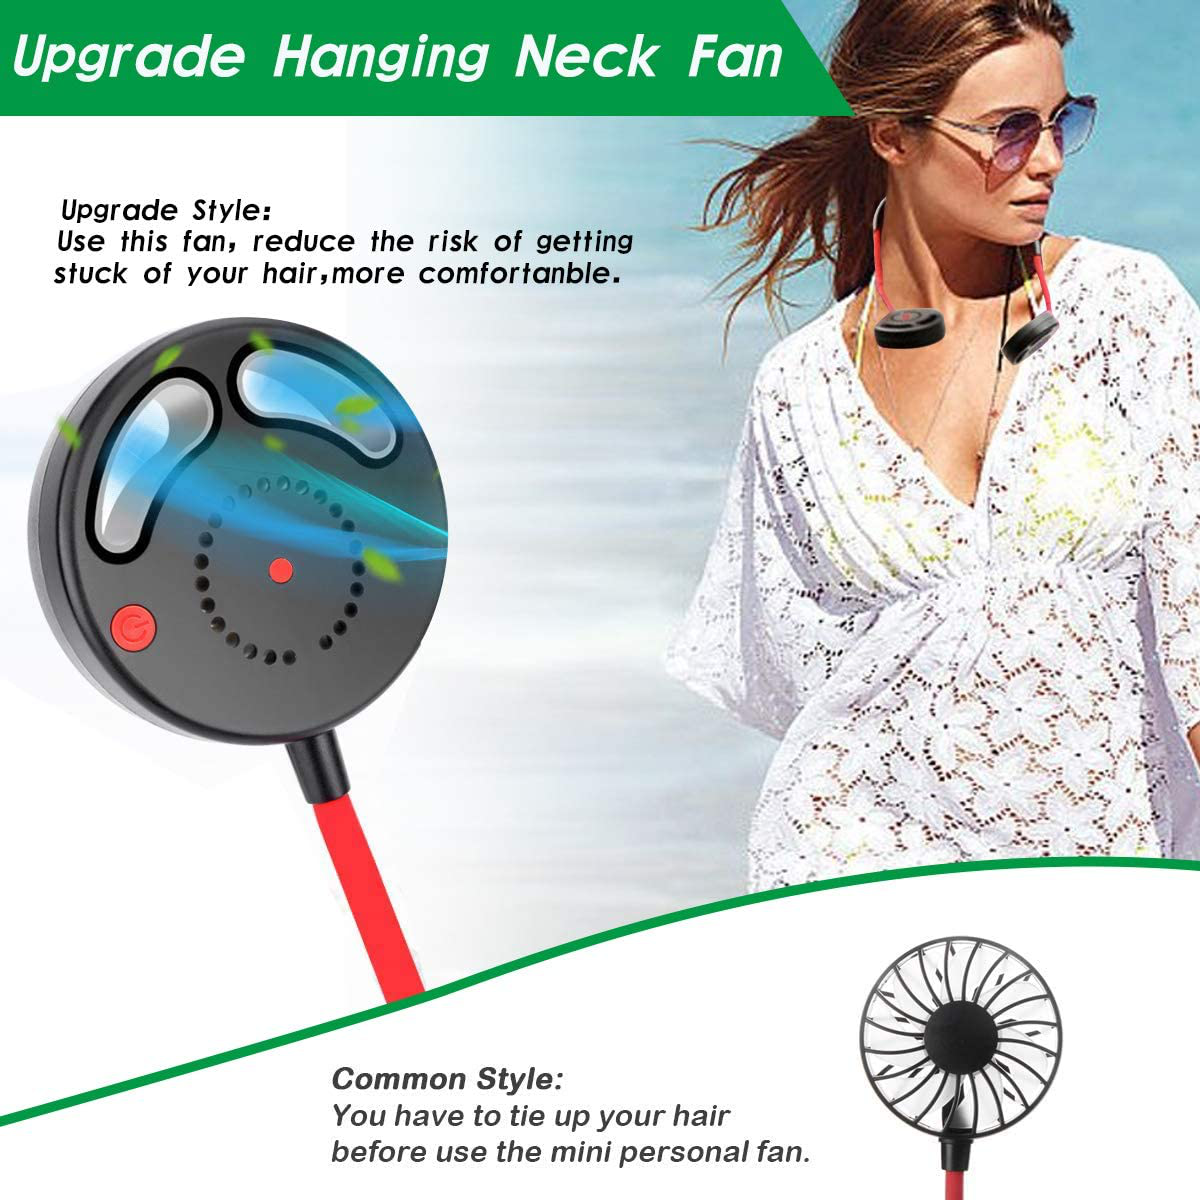 Hands Free Portable Neck Fan, Mini USB Bladeless Personal Fan with Neck Hanging Design USB Battery Rechargeable with 3 Speeds Adjustable Air Flow, 2 Wind Head for Travel Outdoor Office Home Sports